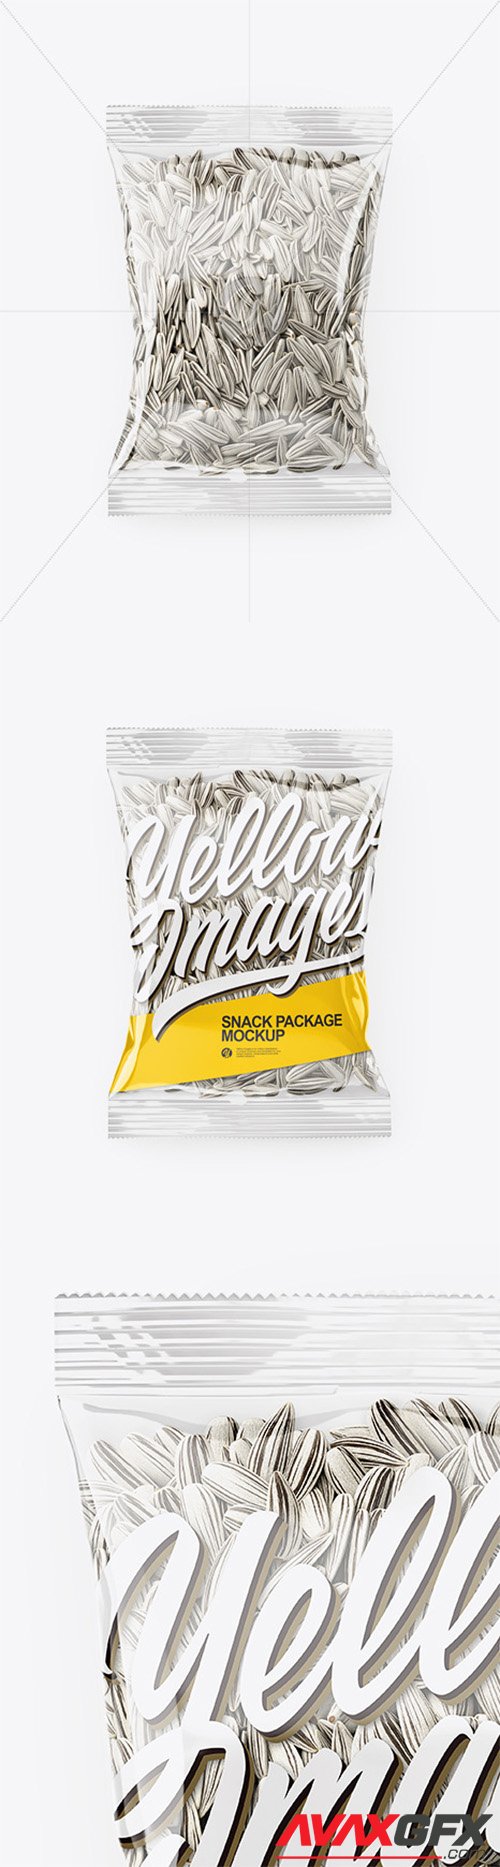 Clear Transparent Plastic Pack with White Sunflower Seeds Mockup - Top View 65863